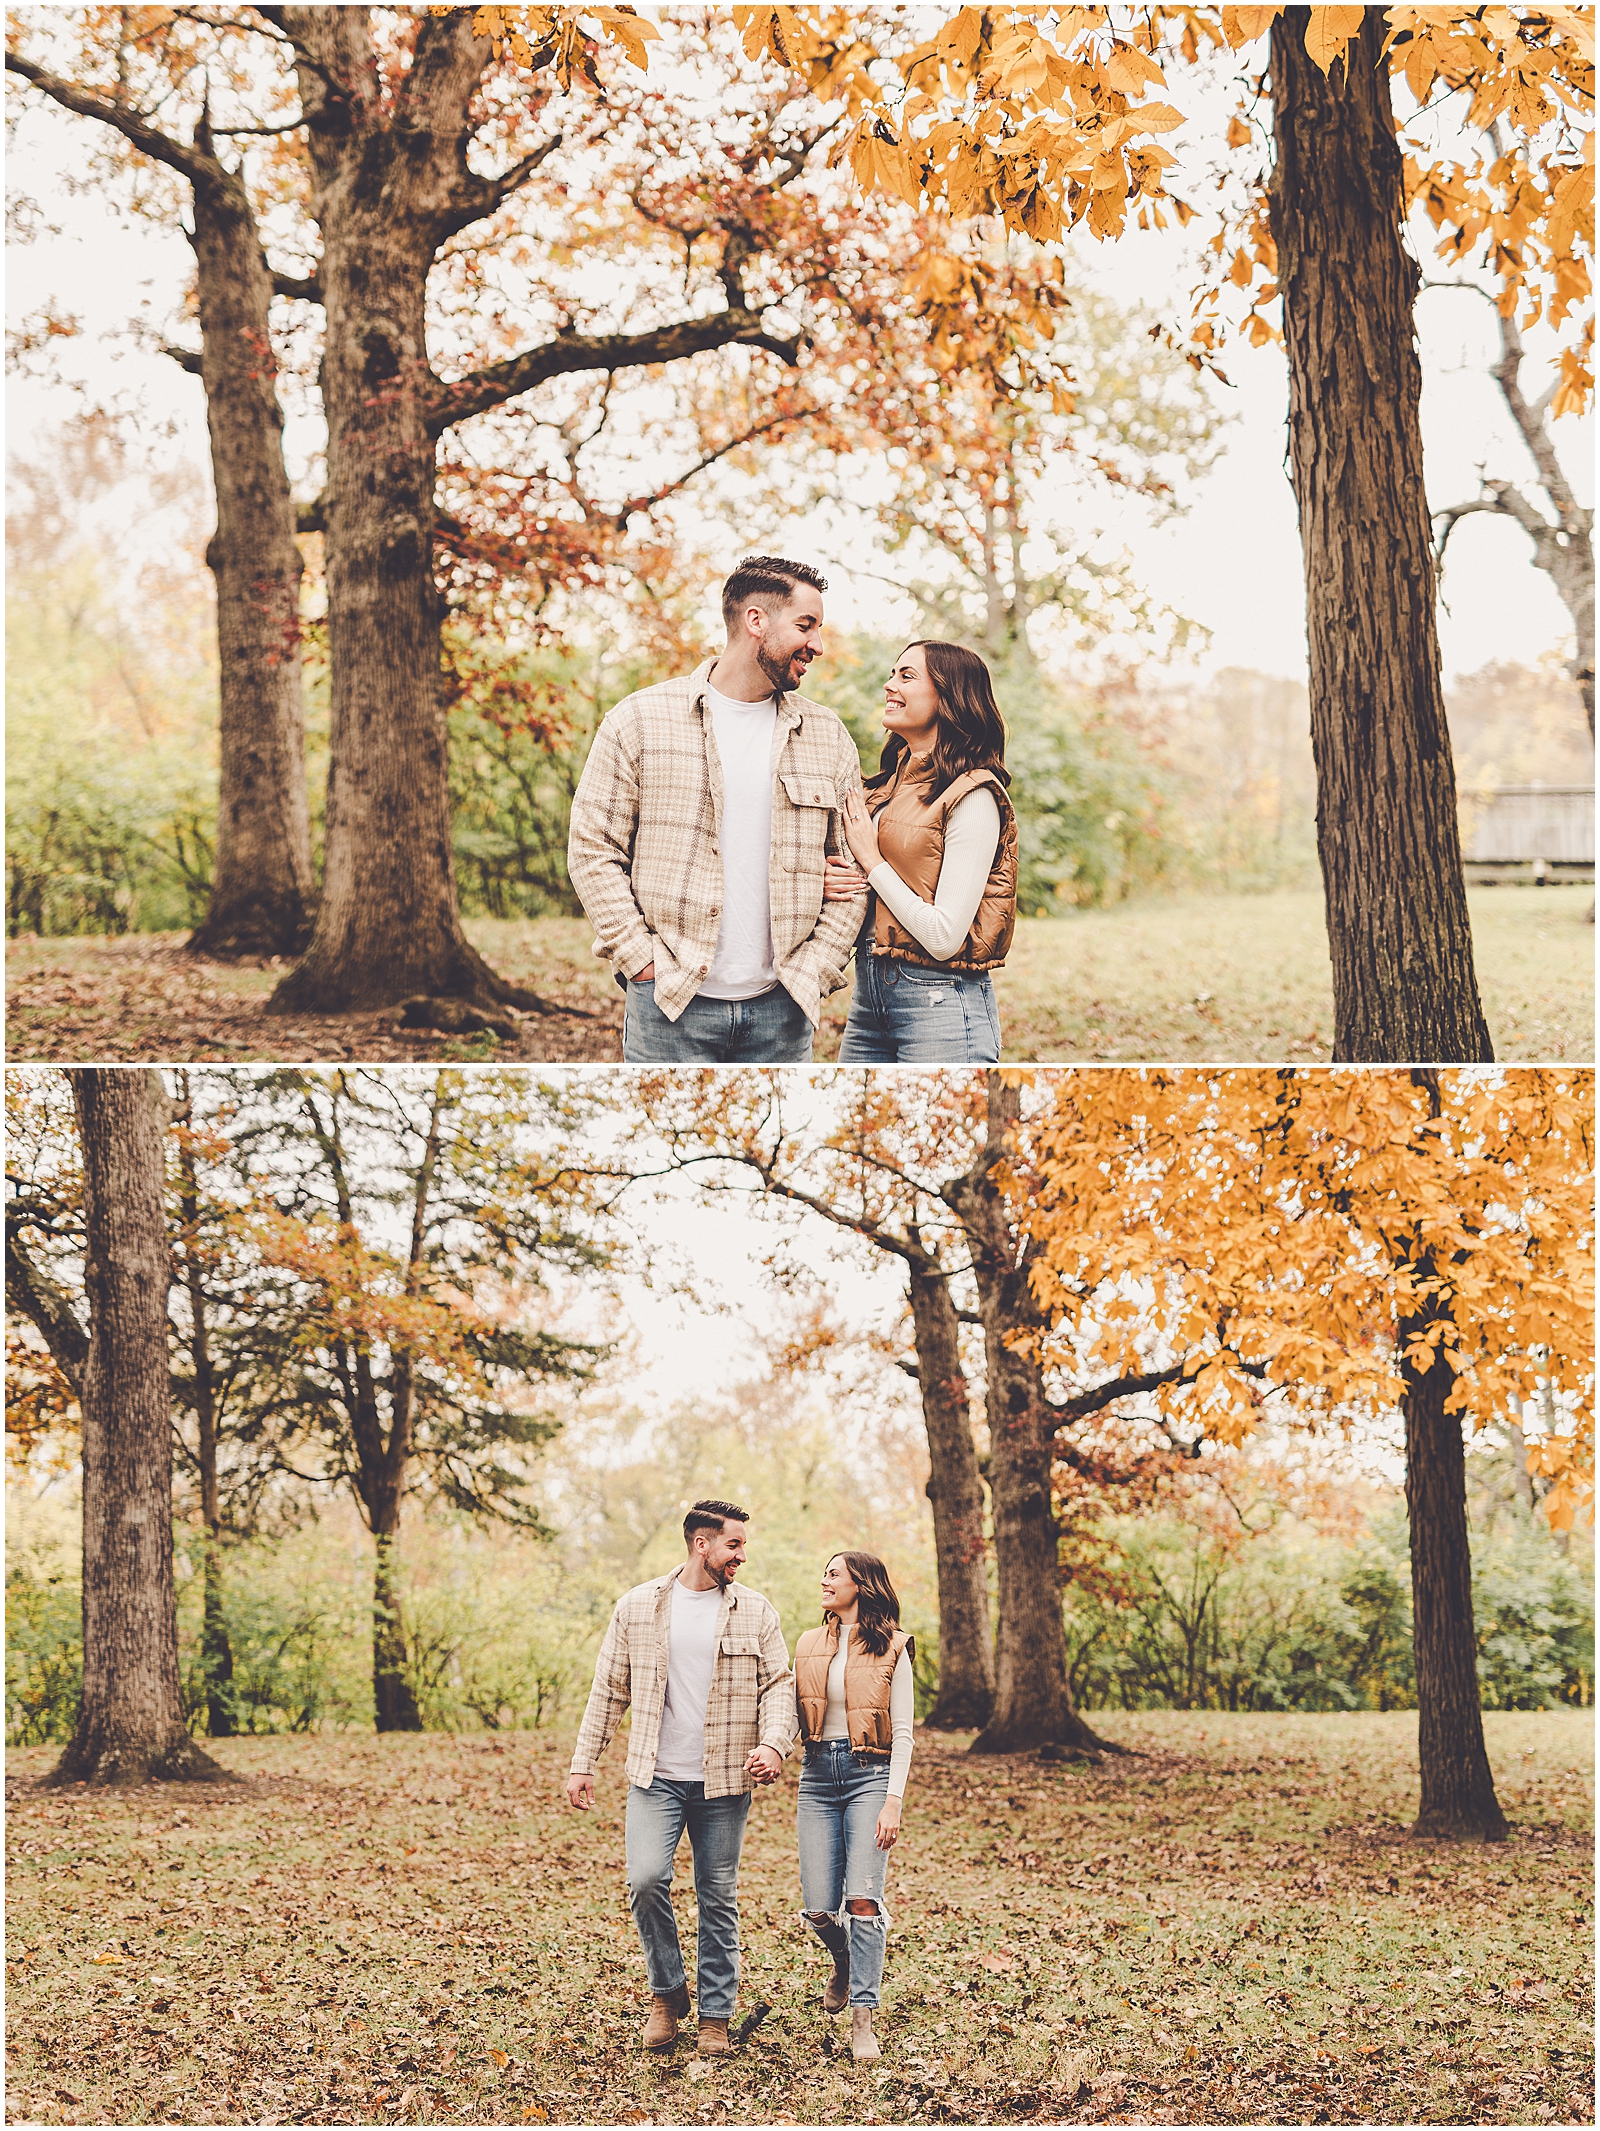 Gillian and Bobby's Kankakee River State Park engagement photos in Bourbonnais with Chicagoland wedding photographer Kara Evans Photographer.